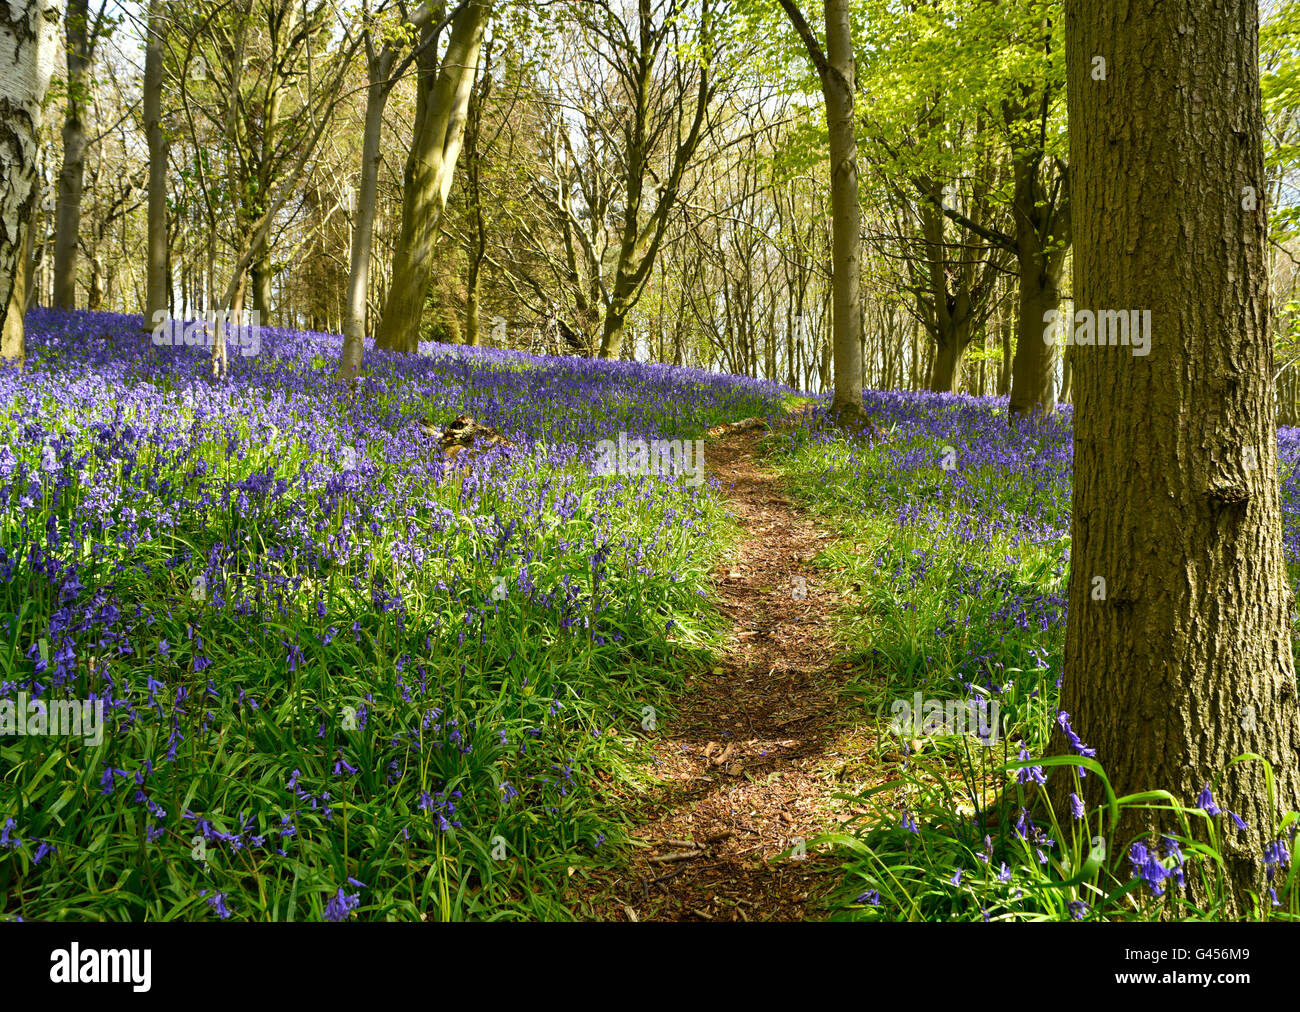 Flowering bluebells bloom in spring time covering large areas of woodland floors protected by National Trust for conservation. Stock Photo